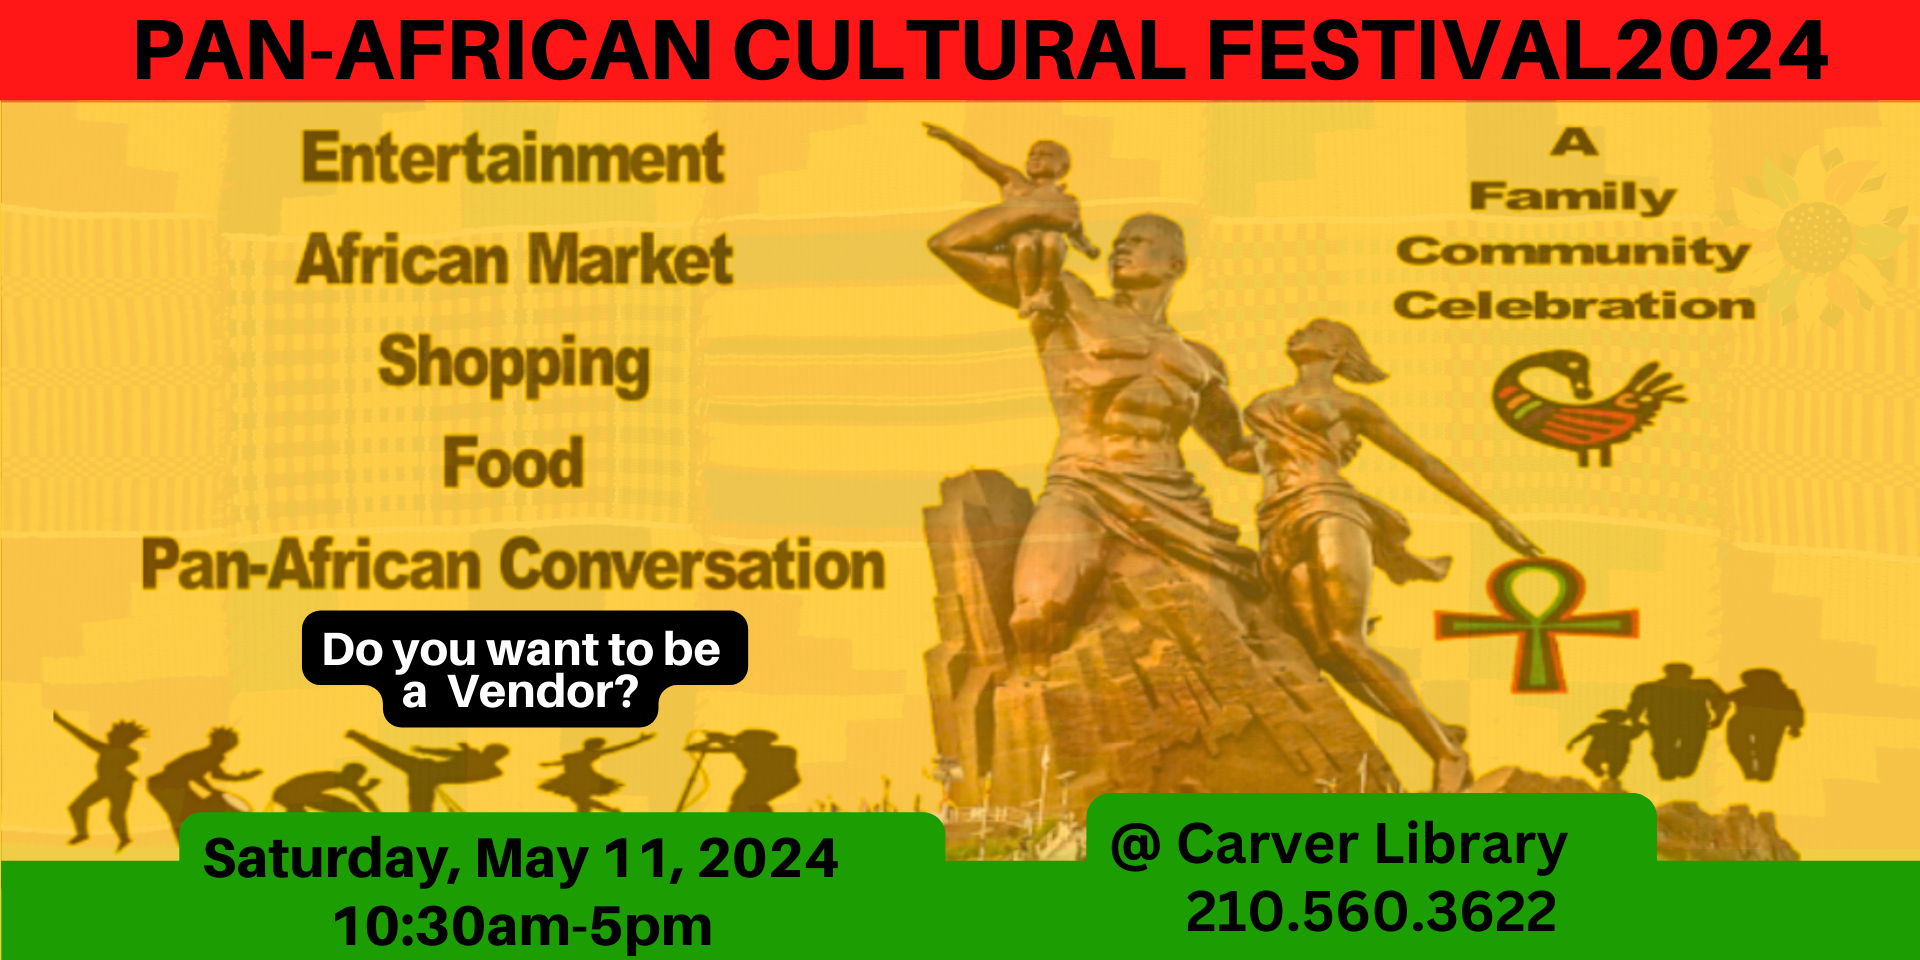 PAN-AFRICAN CULTURAL FESTIVAL 2024 promotional image